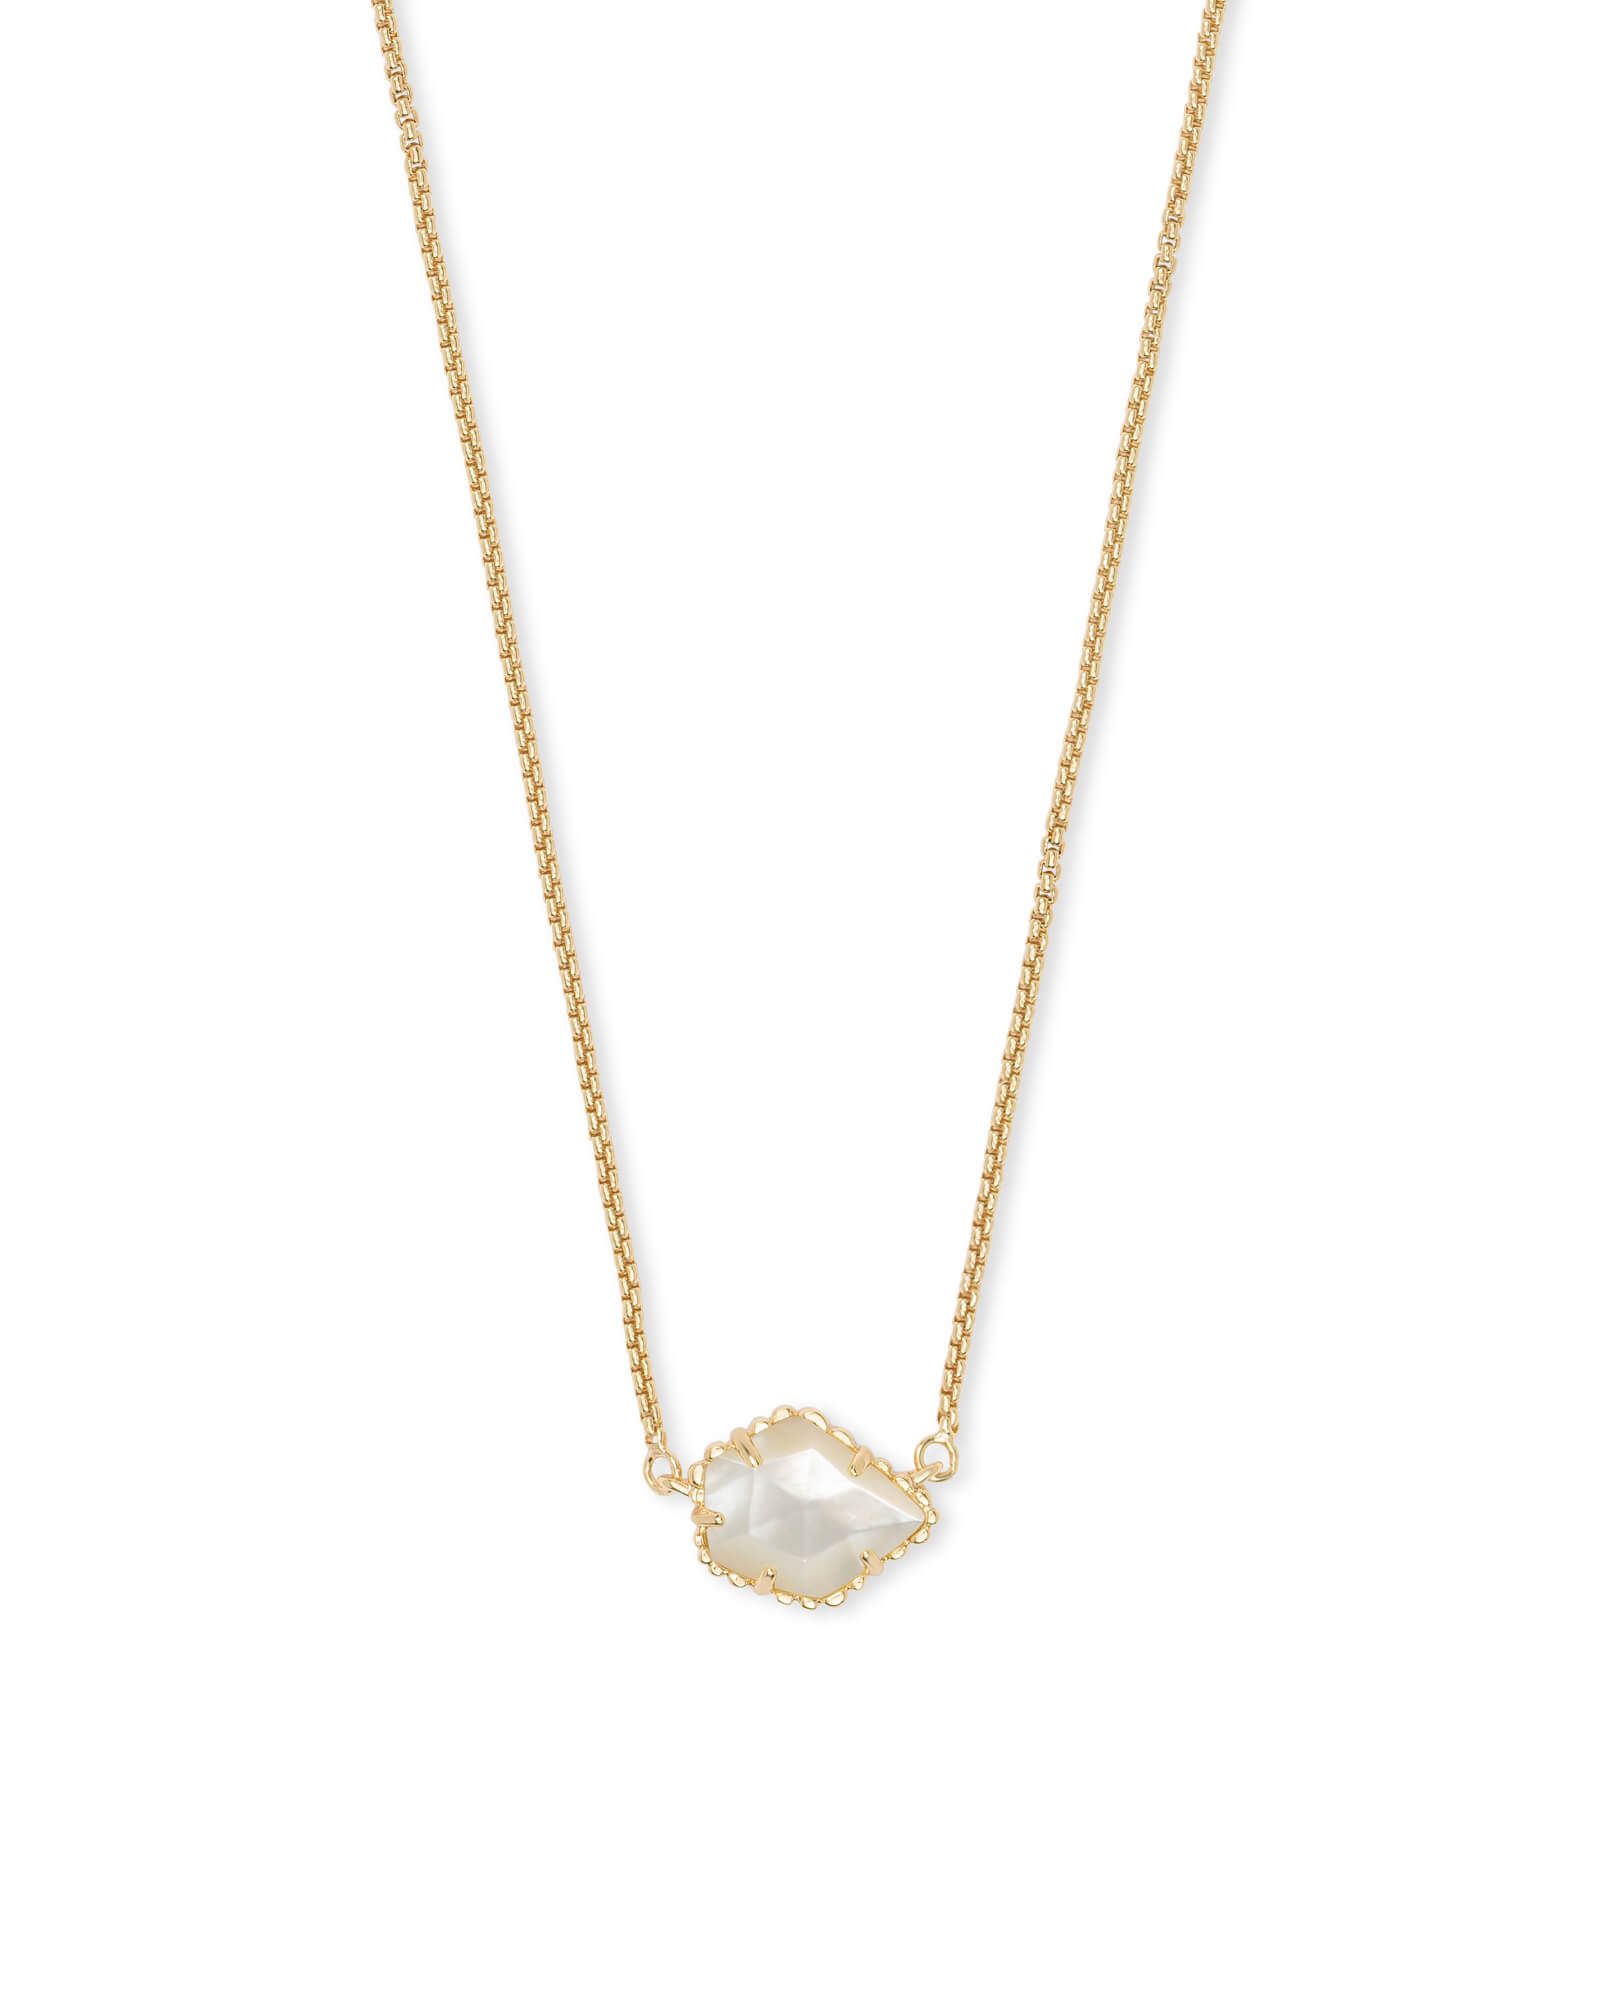 Tess Gold Small Pendant Necklace In Ivory Pearl | Kendra Scott